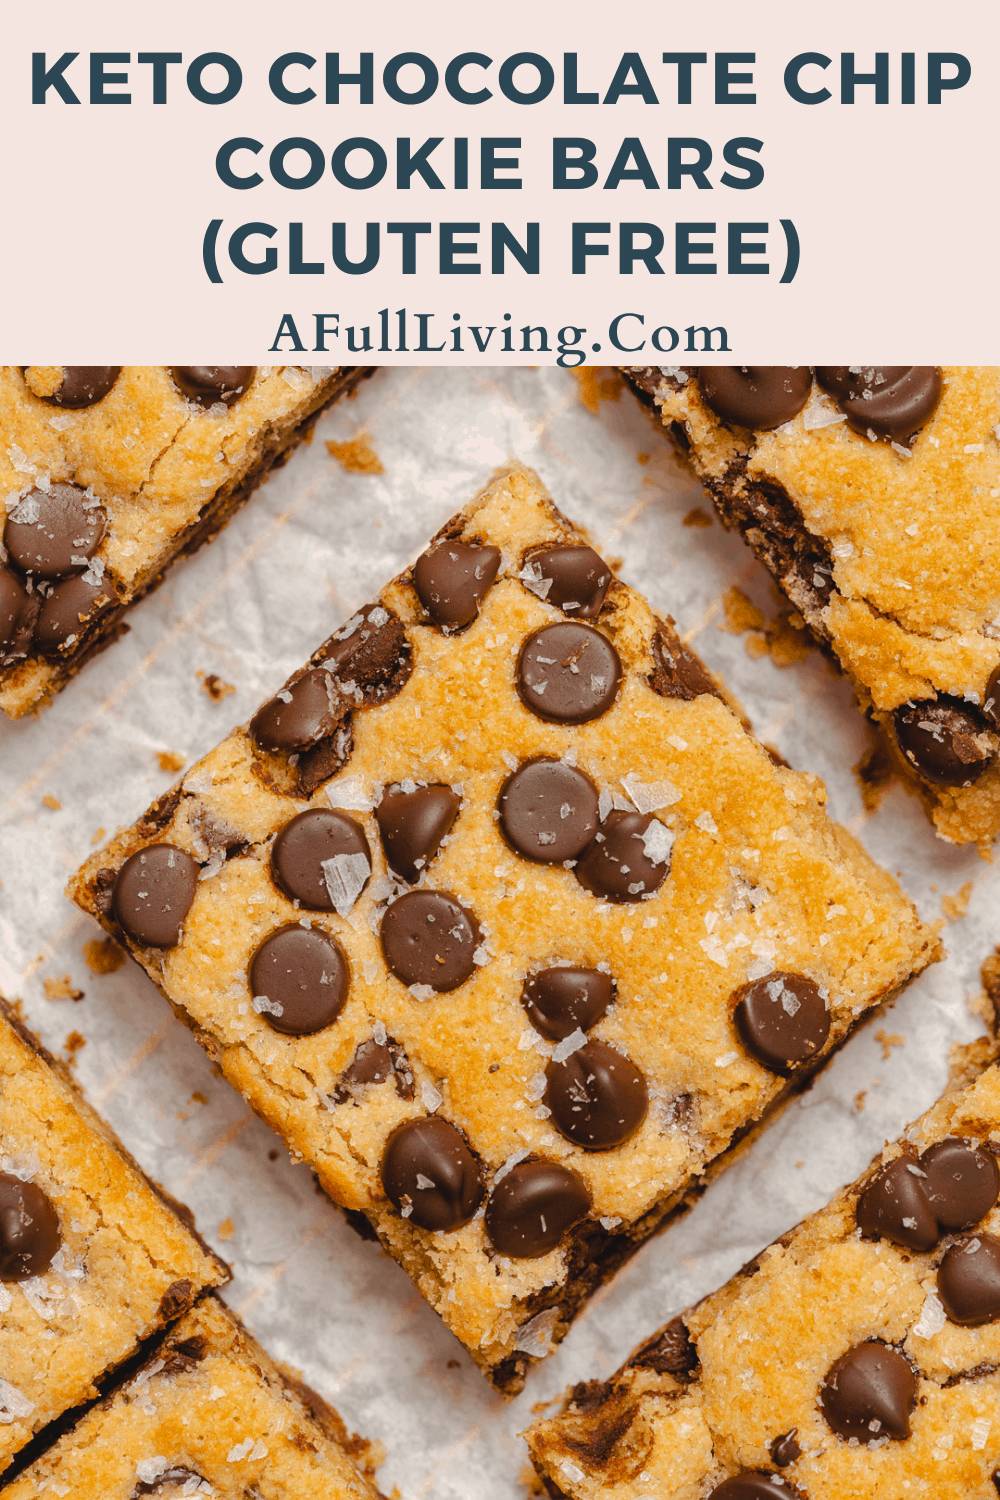 Keto Chocolate Chip Cookie Bars (Gluten Free) graphic with text